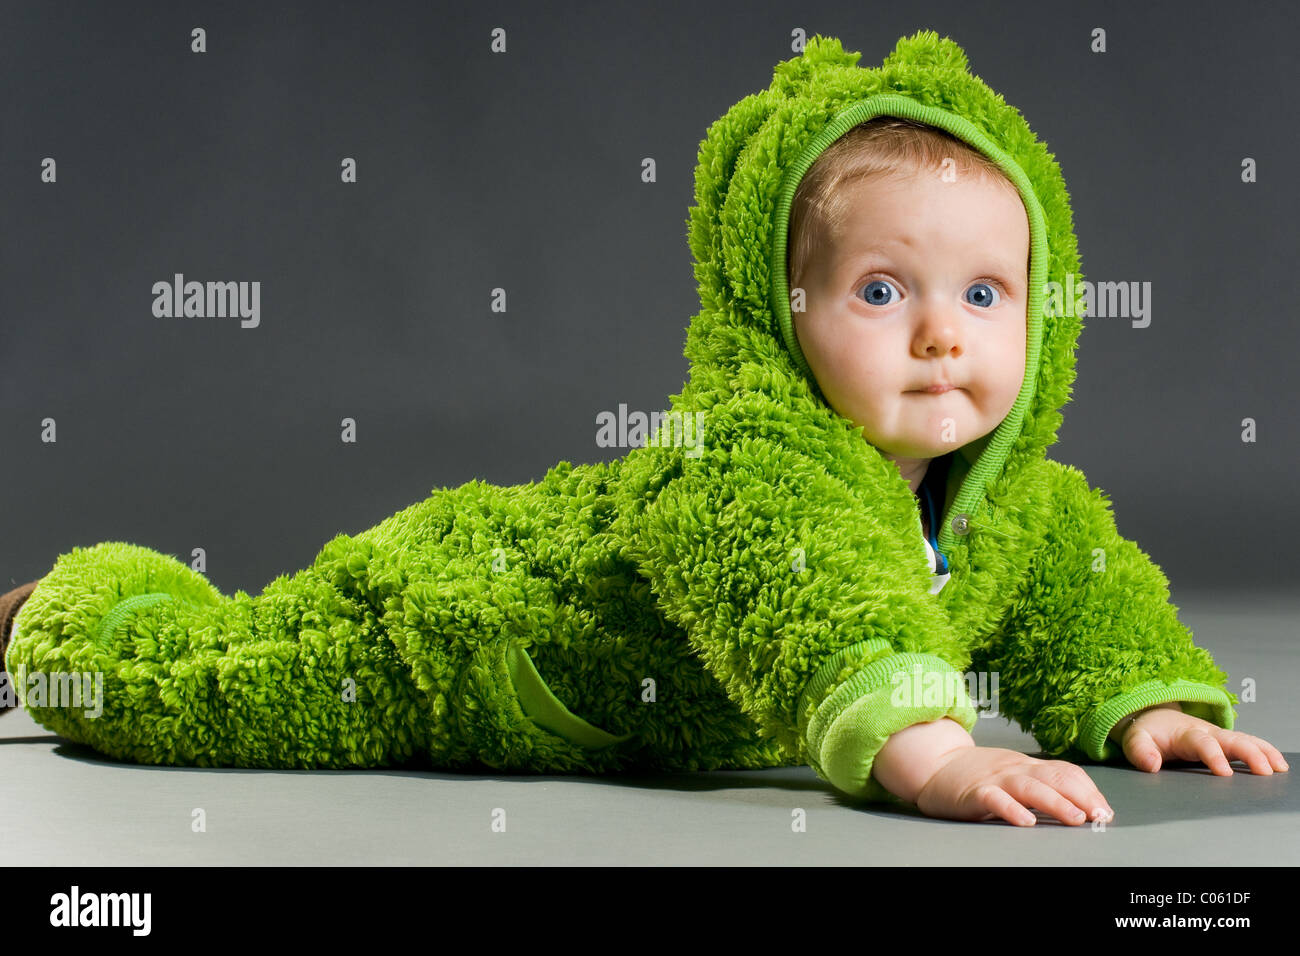 Baby wearing a frog costume Stock Photo